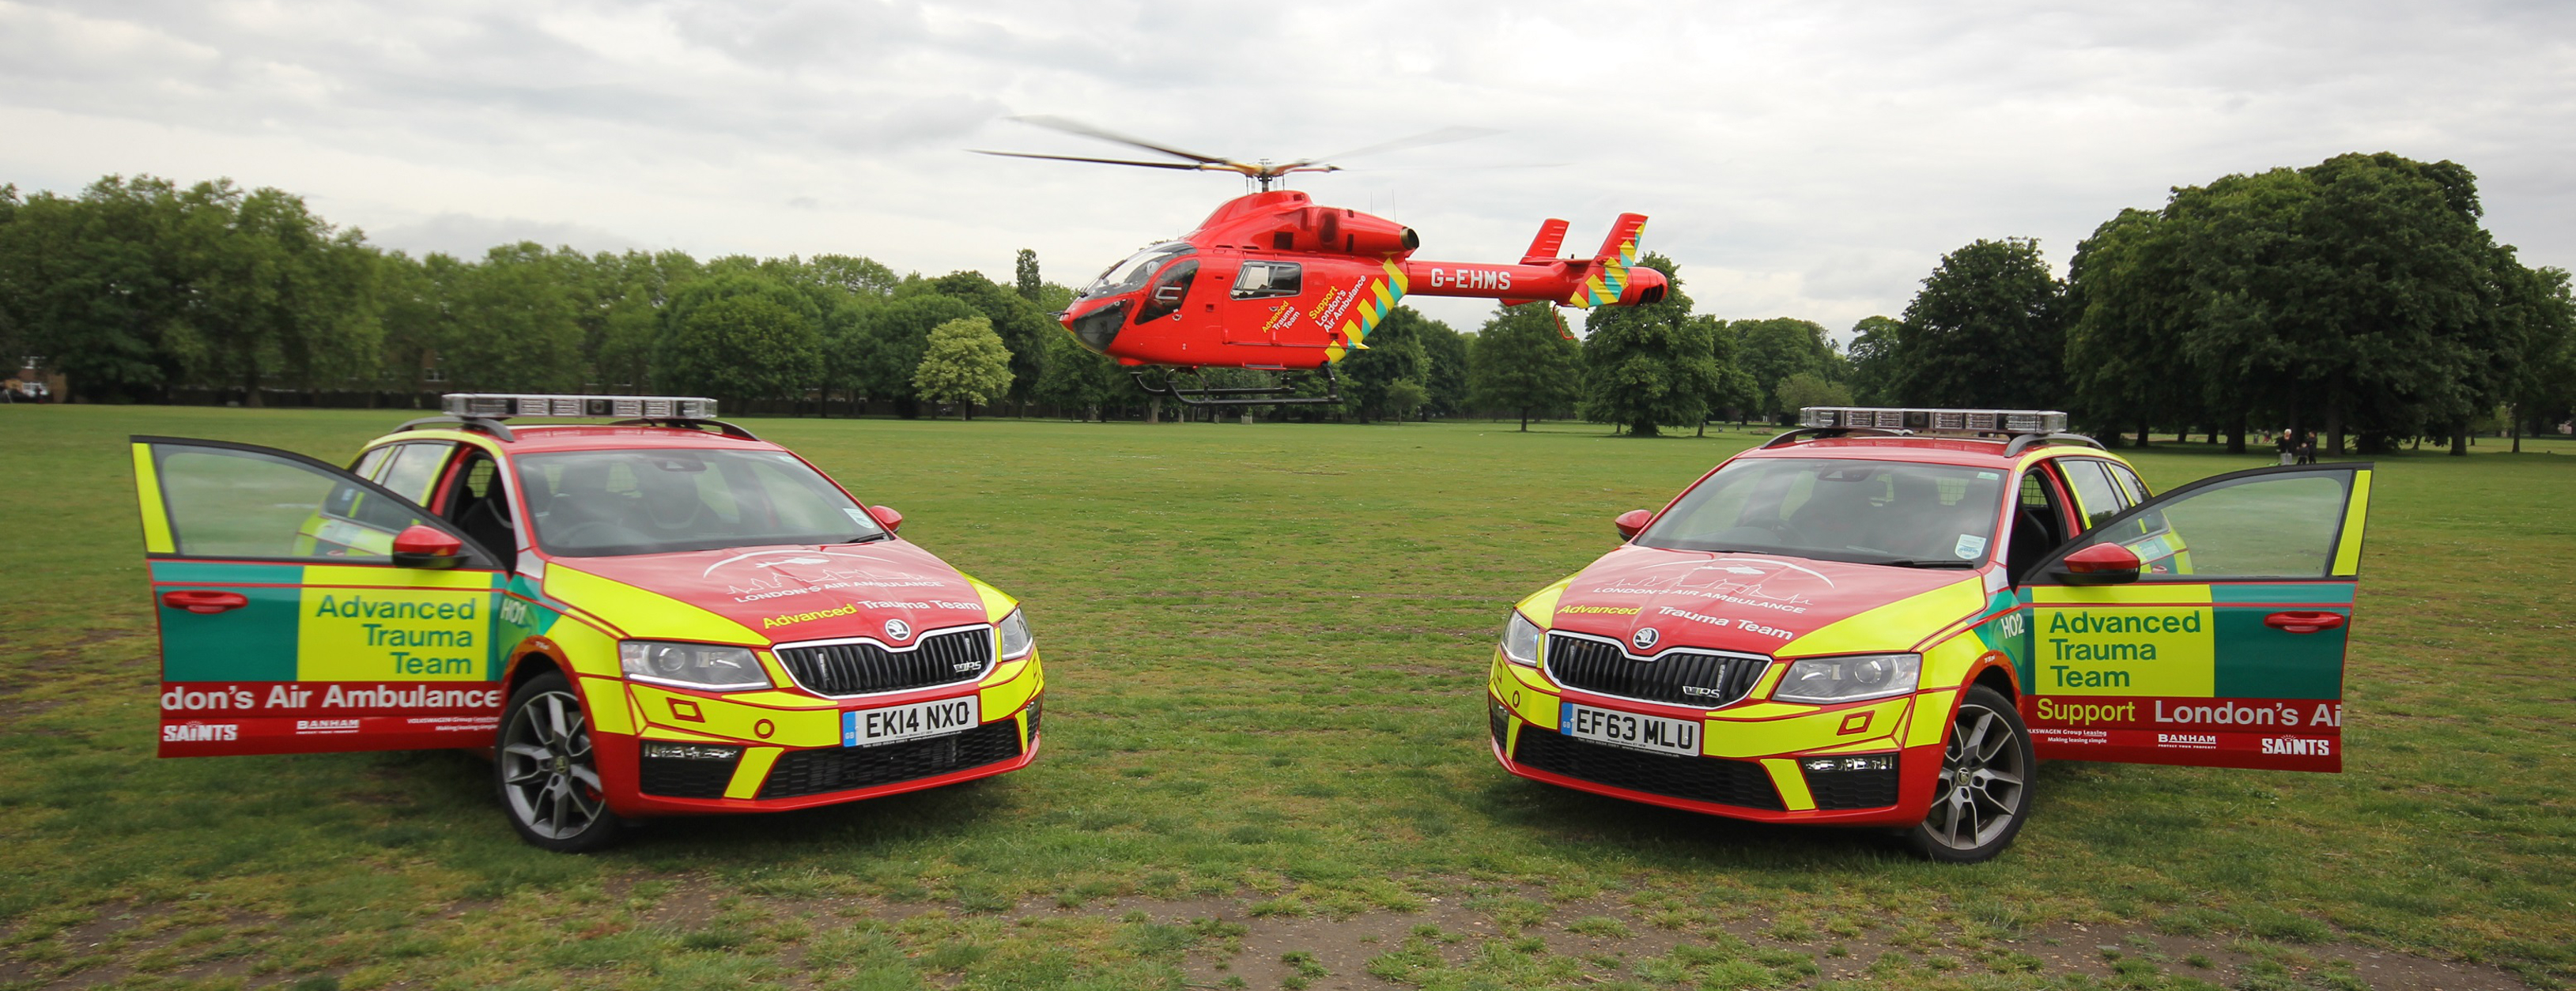 LAA Helicopter and Response Vehicle King's College London Emergency Medicine Society (KCLEMS)